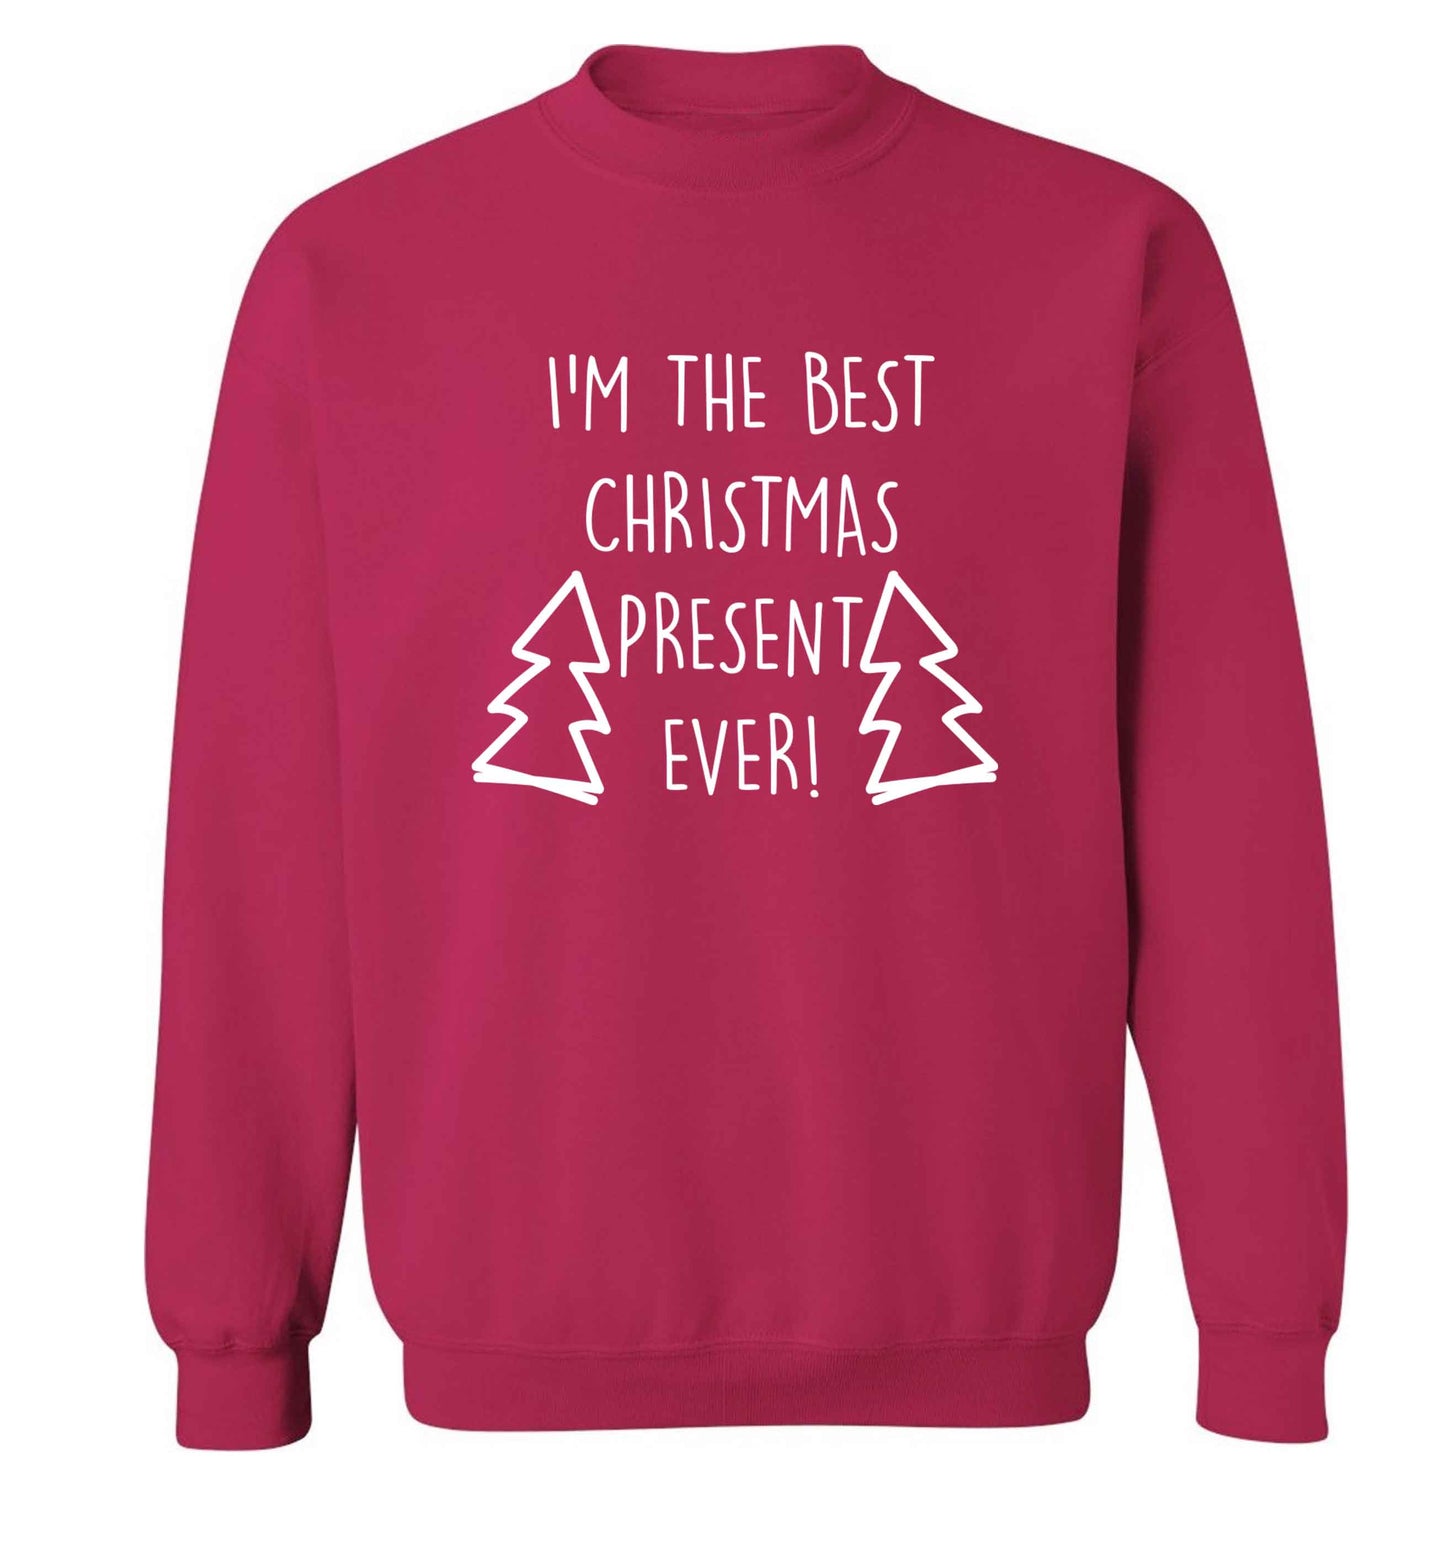 I'm the best Christmas present ever adult's unisex pink sweater 2XL